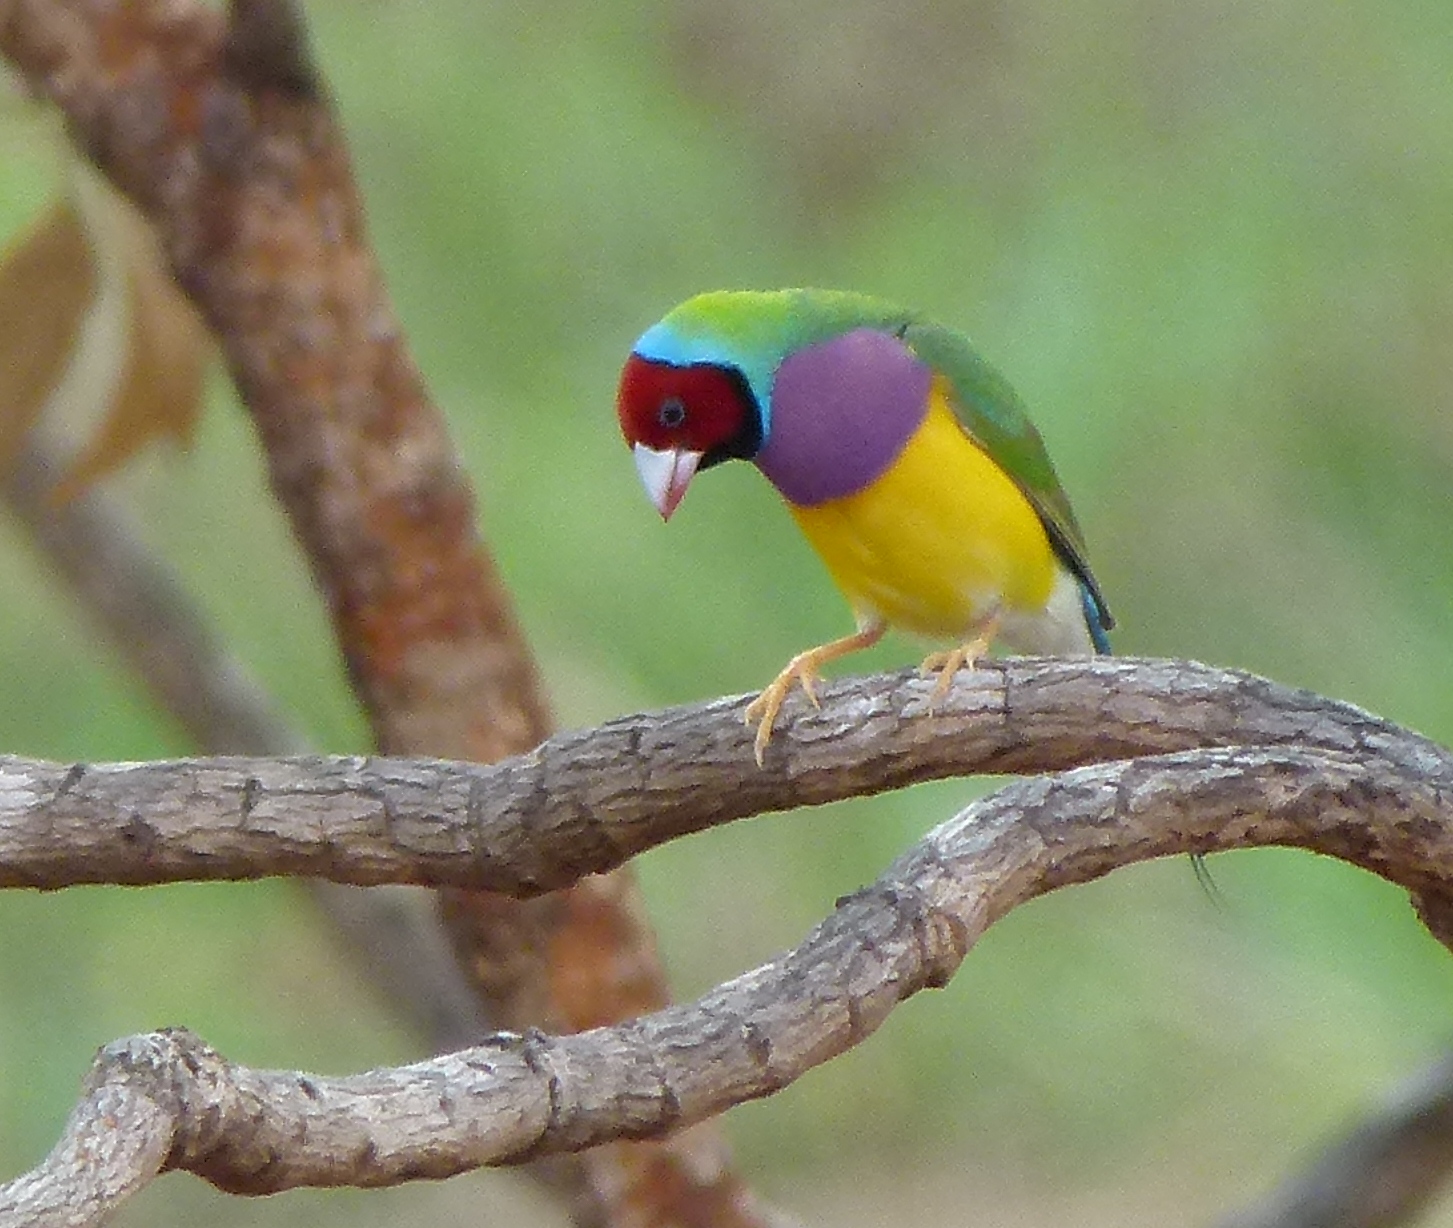 This gorgeous Red-headed male Gouldian Finch appeared on a branch right next to our vehicle as when we stopped to watch some Long-tailed Finches on the Marrakai Track. We didn't even have to get out of the vehicle. Photo © Mike Jarvis